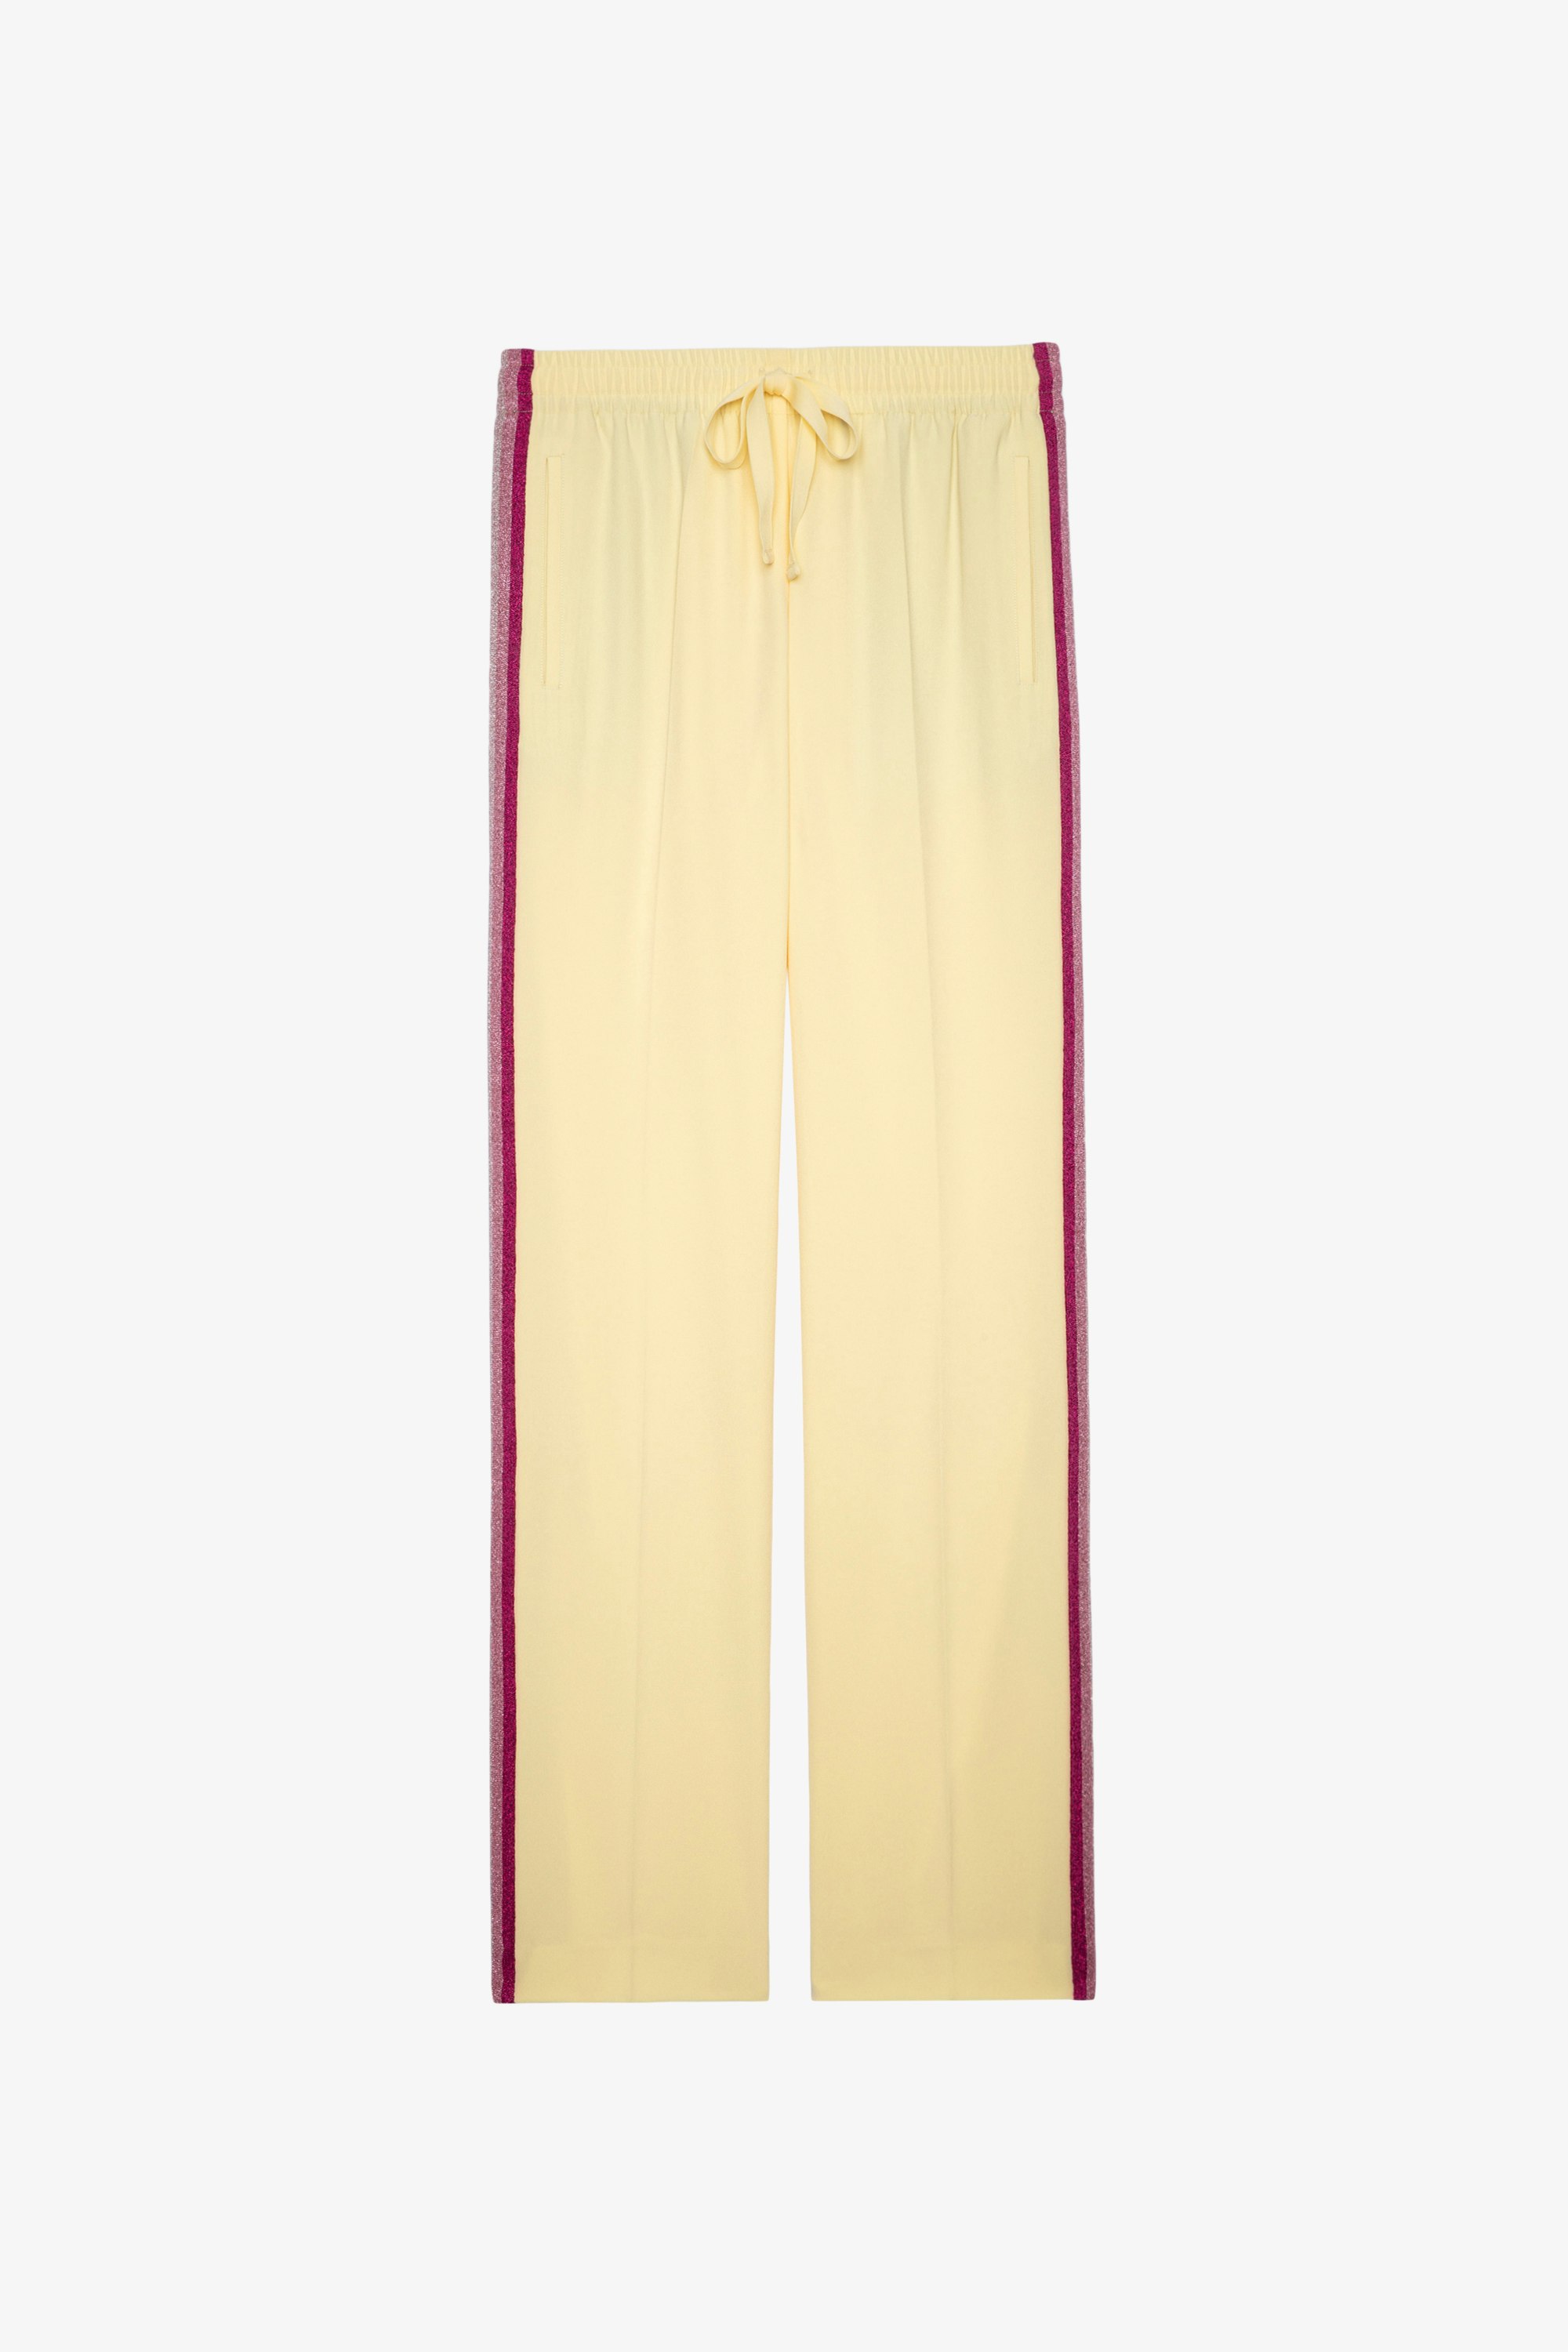 Pomy Crepe Trousers Women's flowing trousers in yellow with glittering side stripes